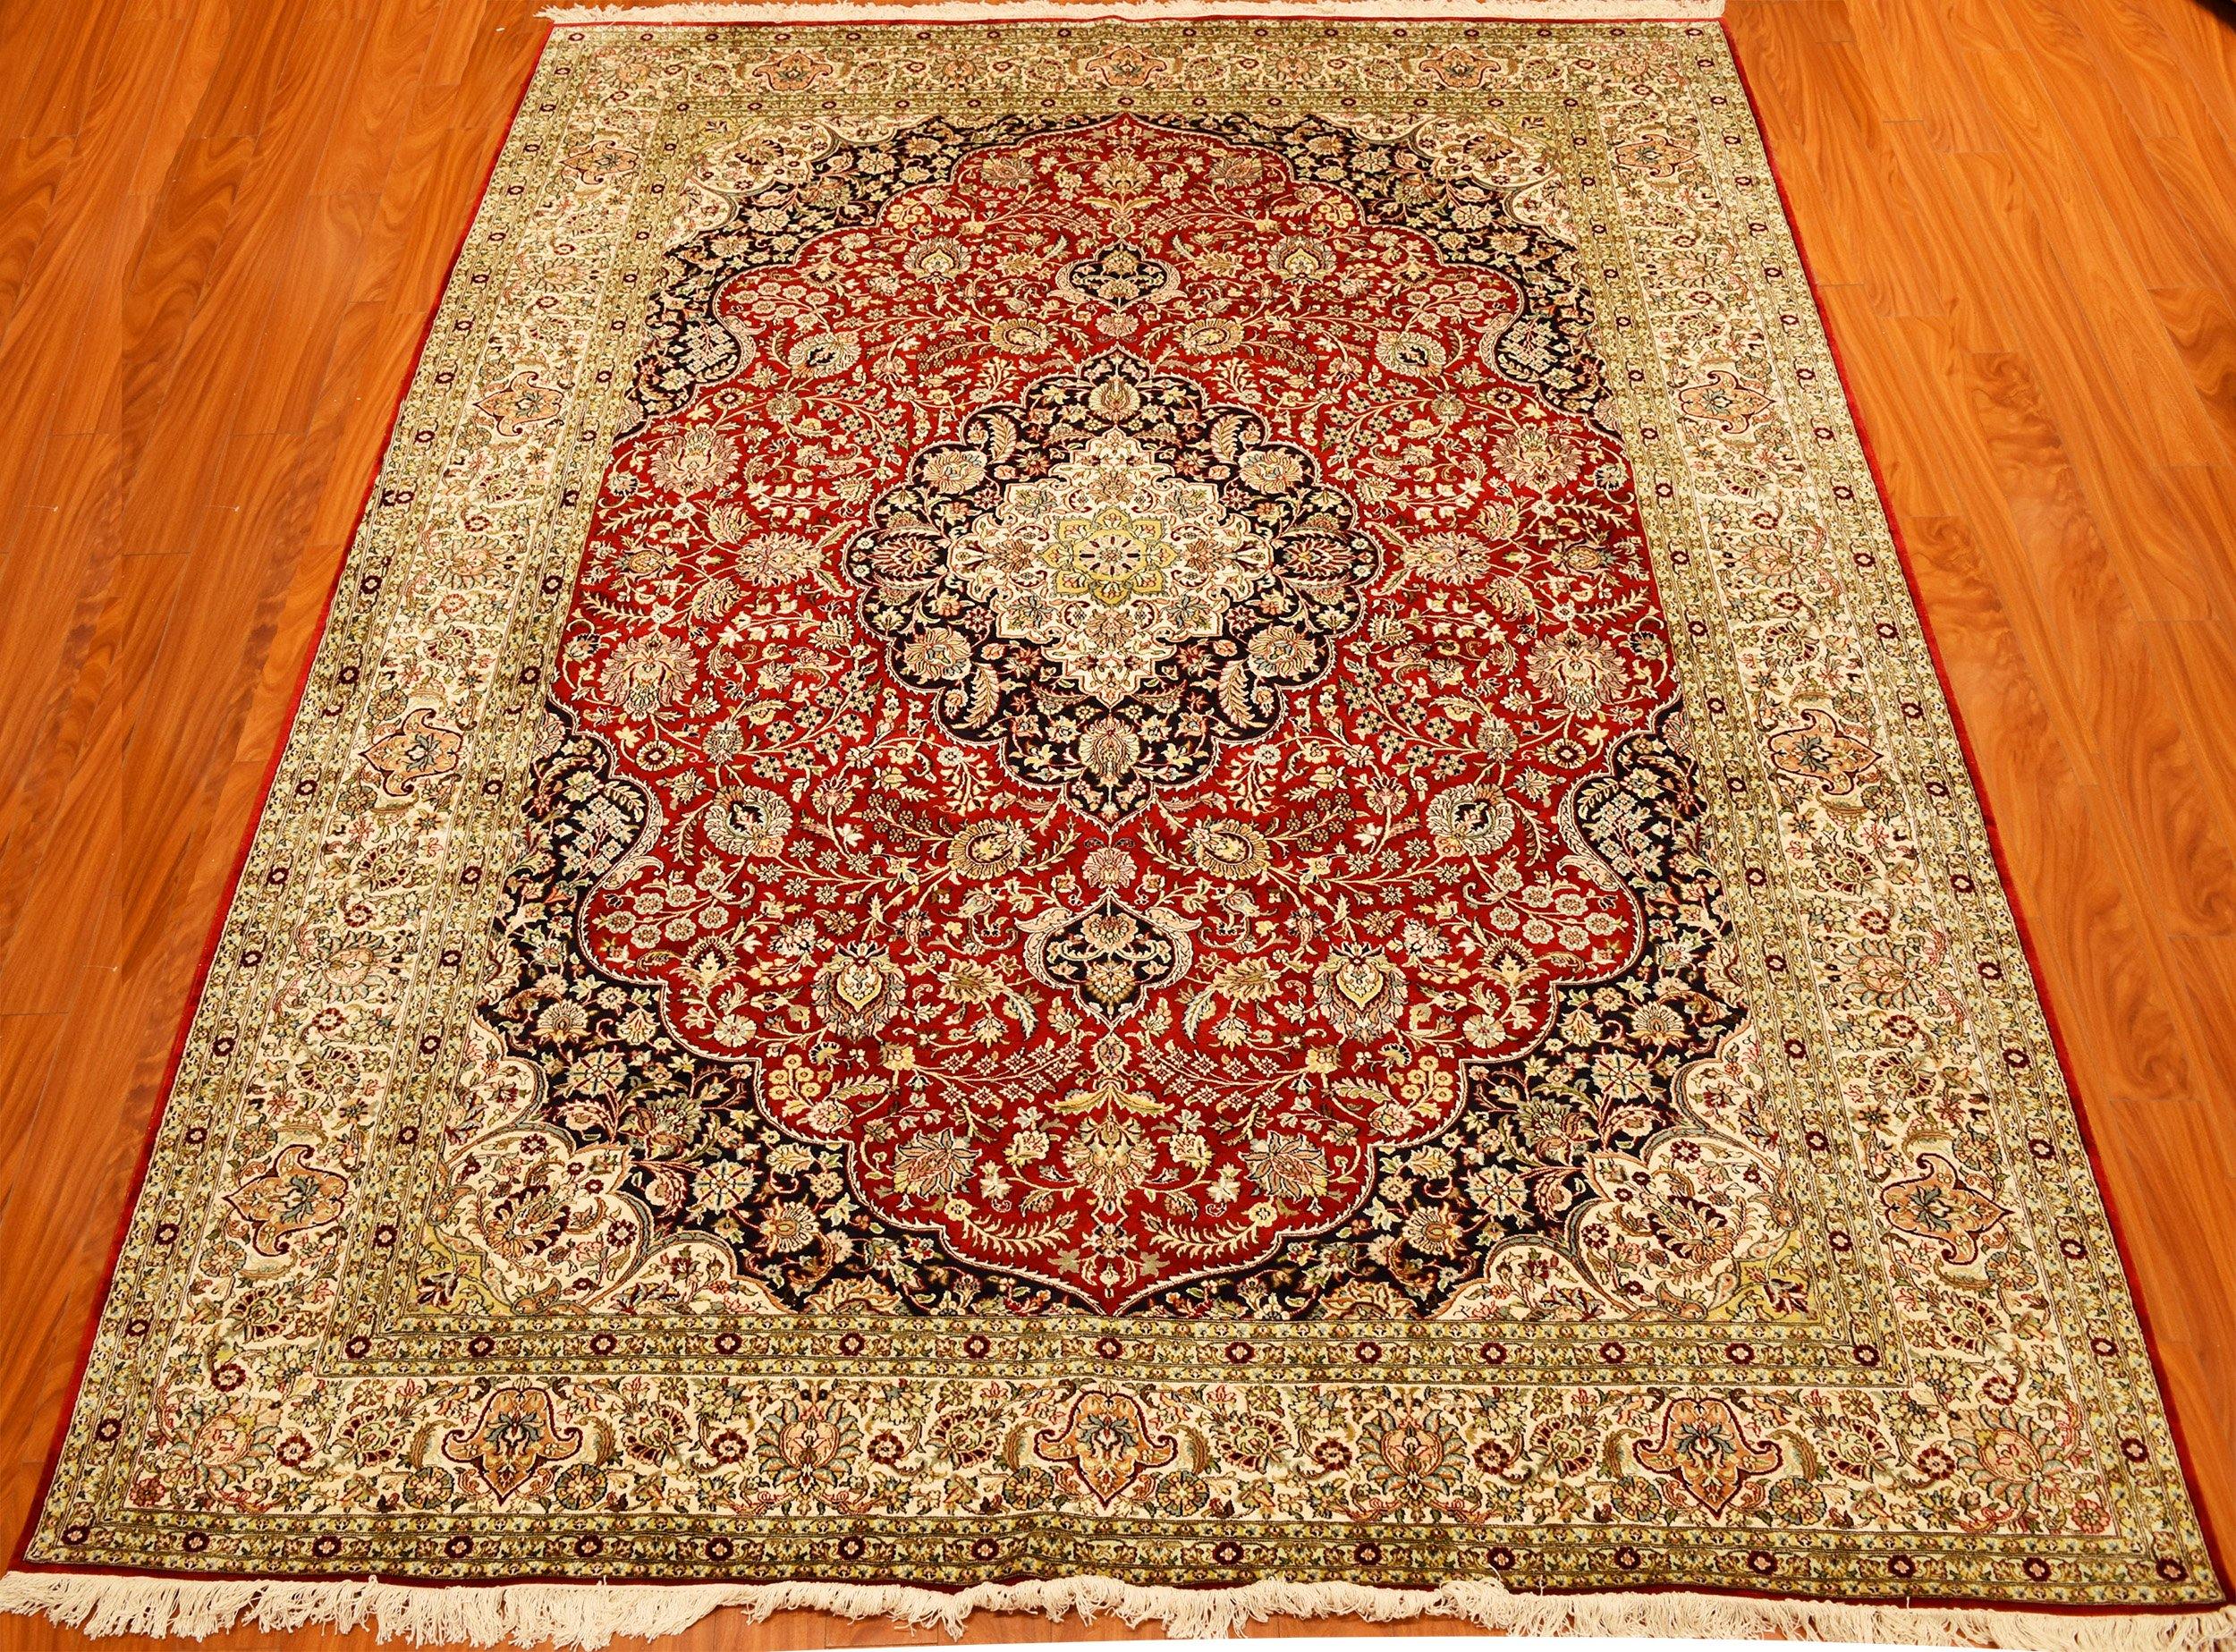 Yilong 9' x 12' Oriental Persian Silk Traditional Rugs Hand Knotted Medallion Design Living Room Carpet 